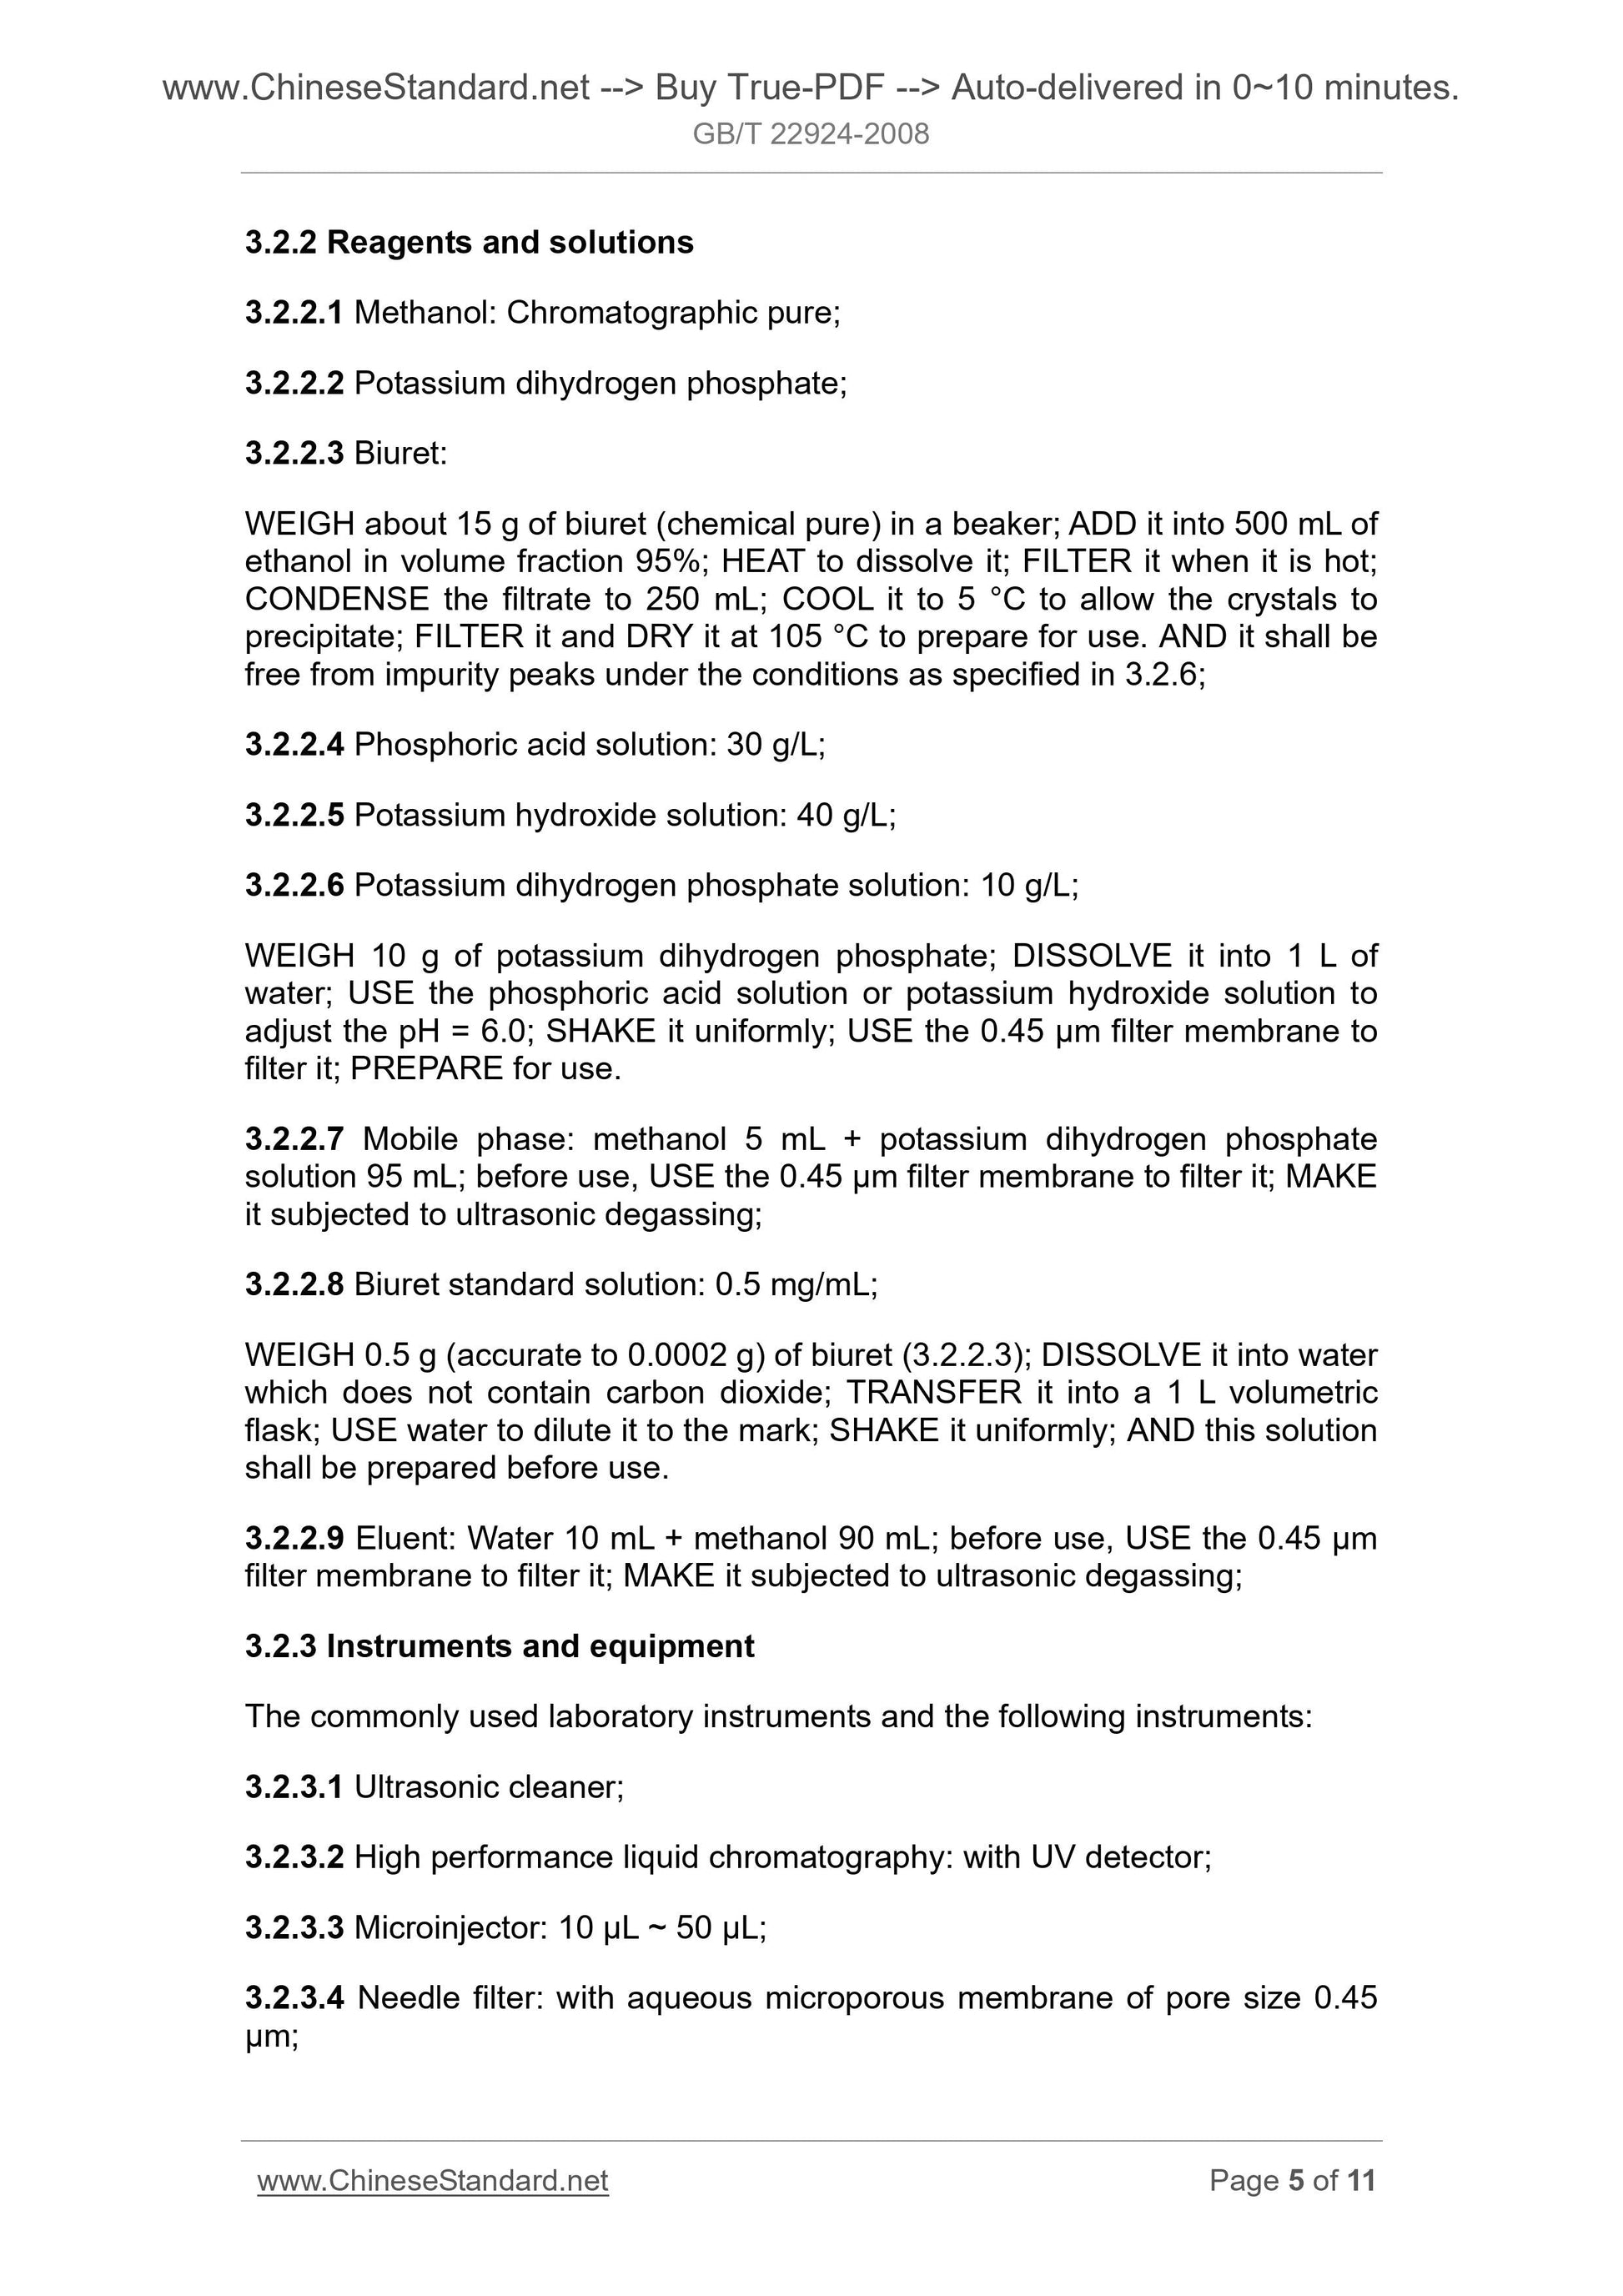 GB/T 22924-2008 Page 4